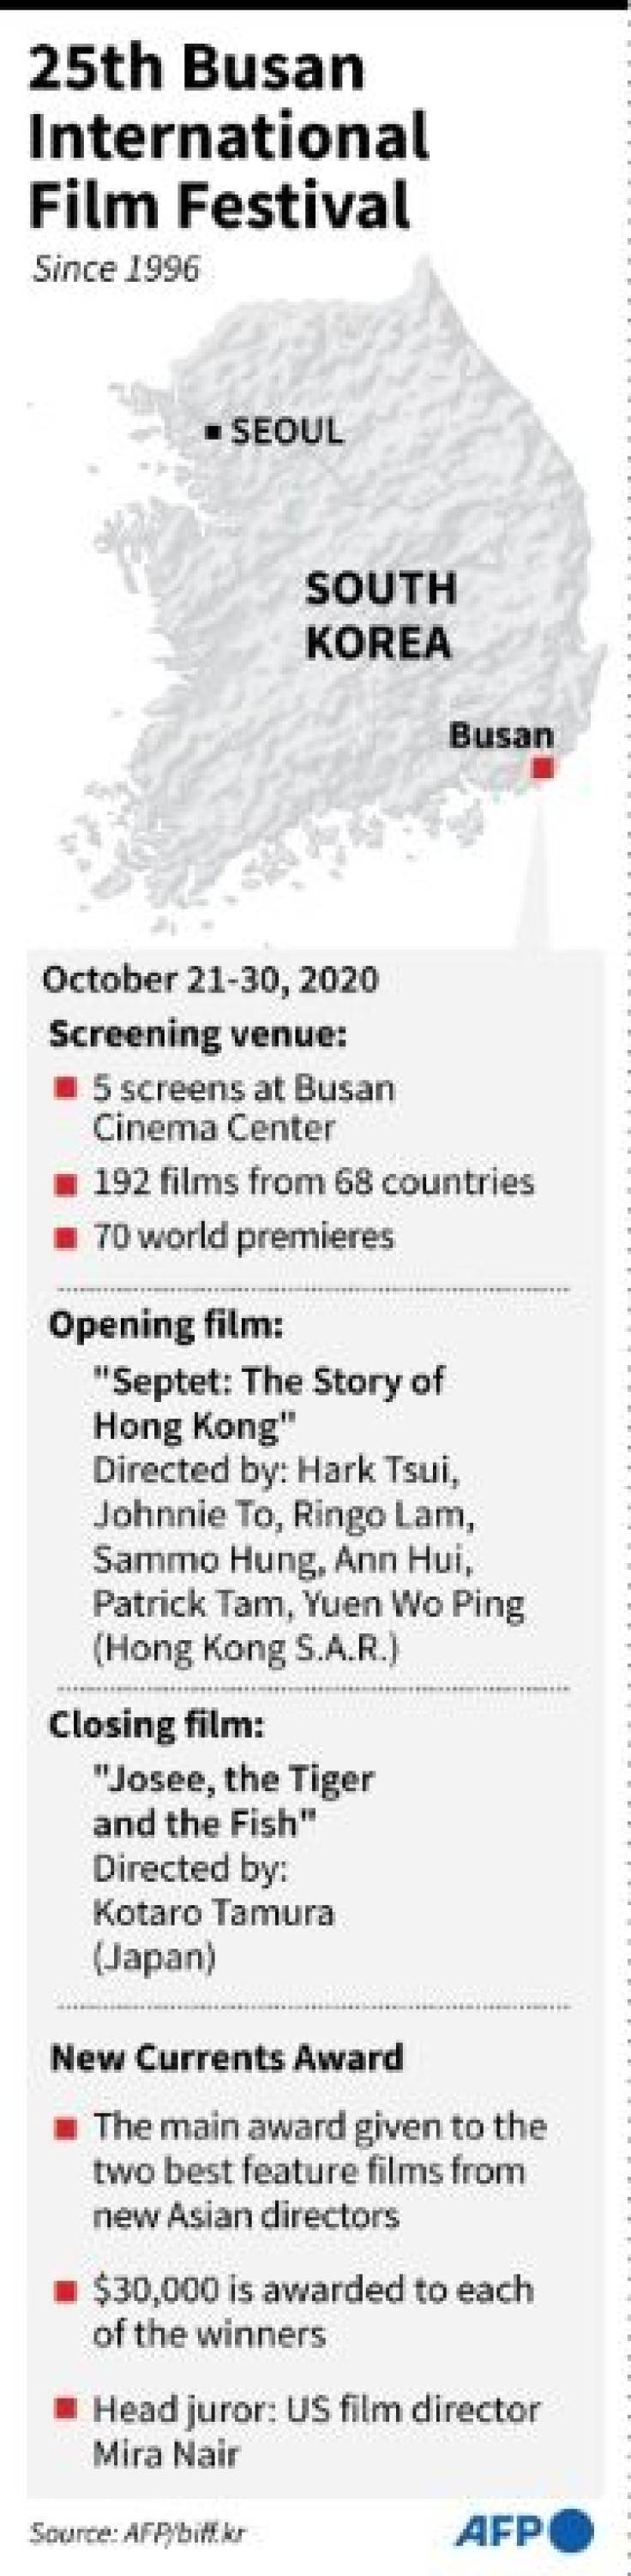 Factfile on the 25th Busan International Film Festival, taking place in South Korea Oct 21-30, 2020.